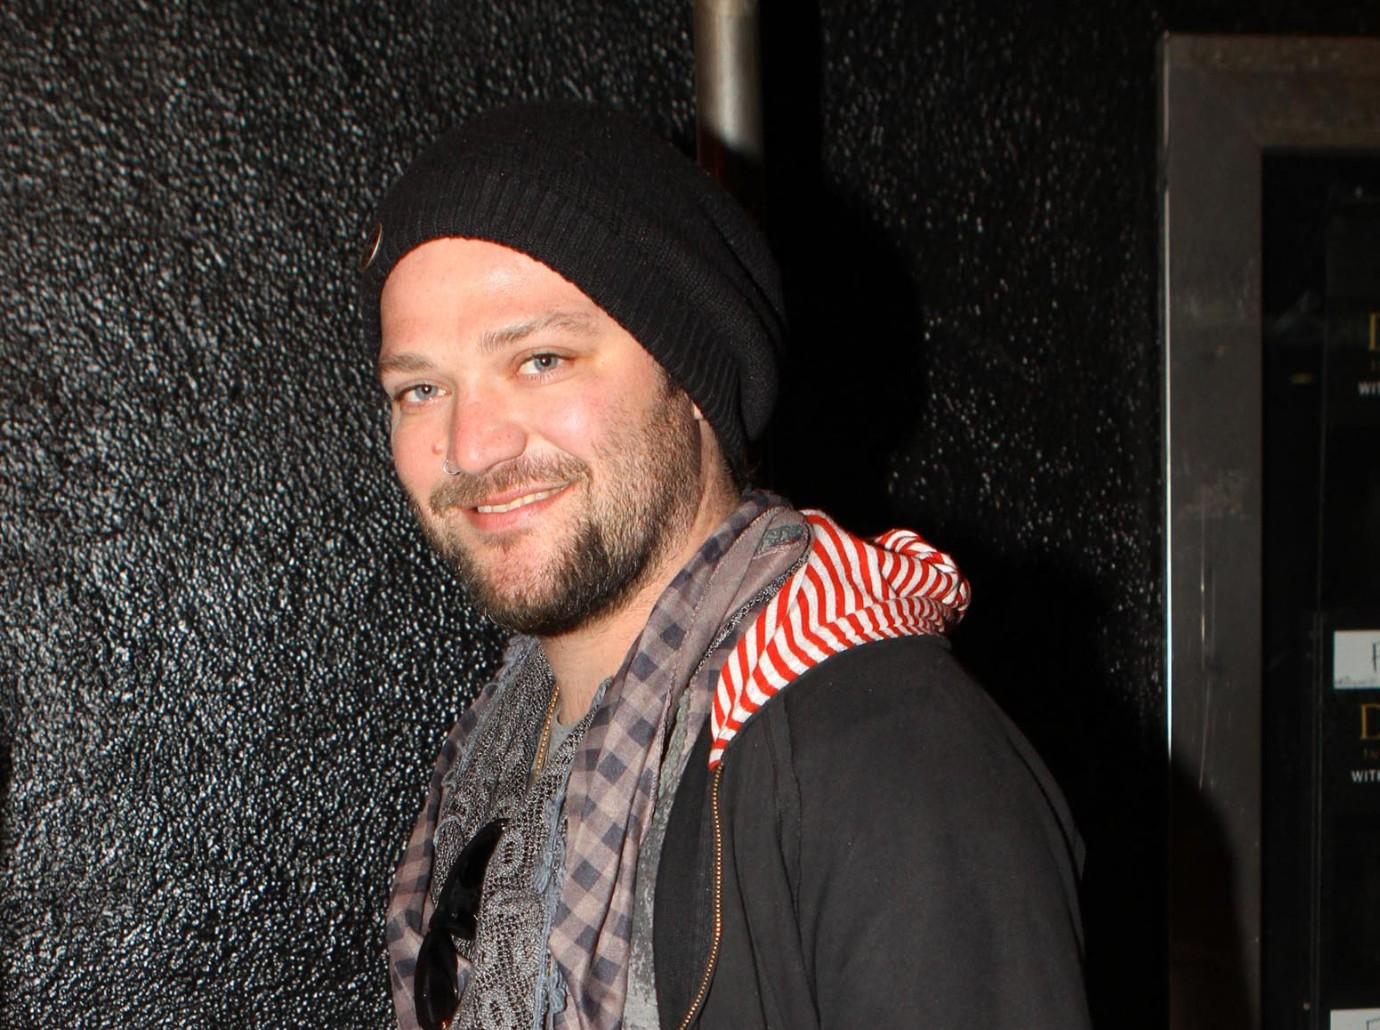 Bam Margera Trashes His Former MTV Costars In New Diss Track image pic